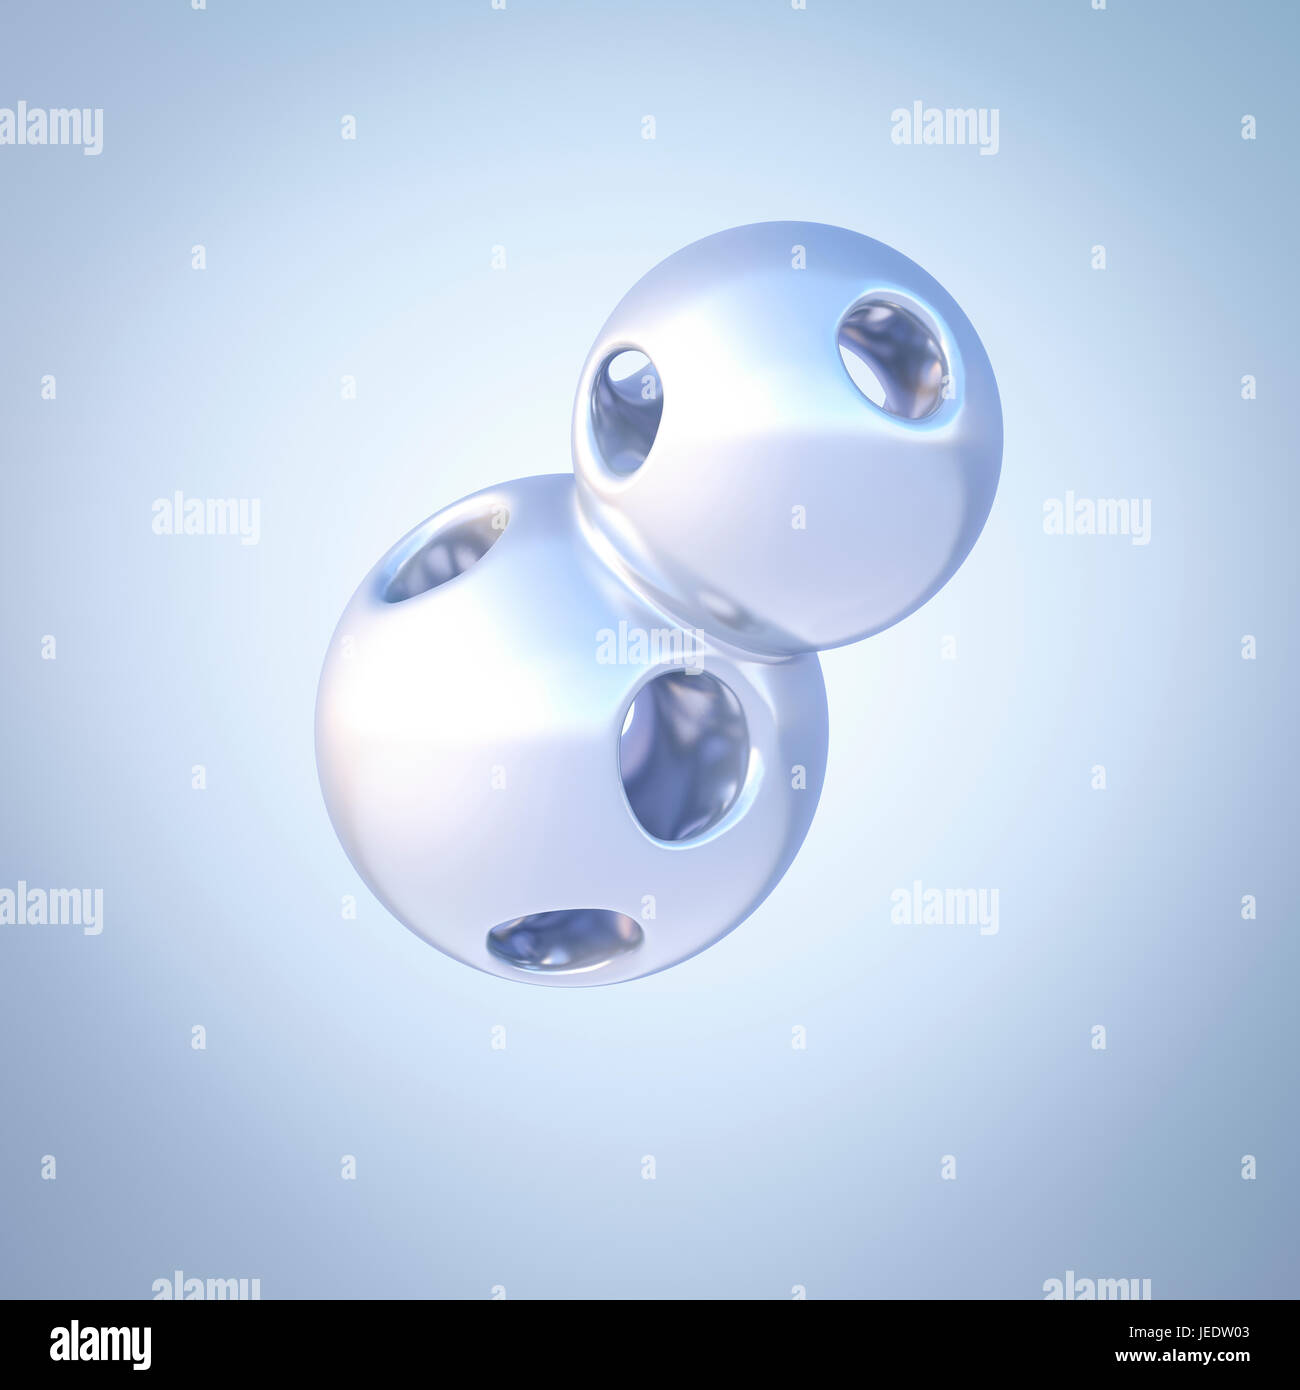 Two connected mercury spheres, 3d rendering Stock Photo